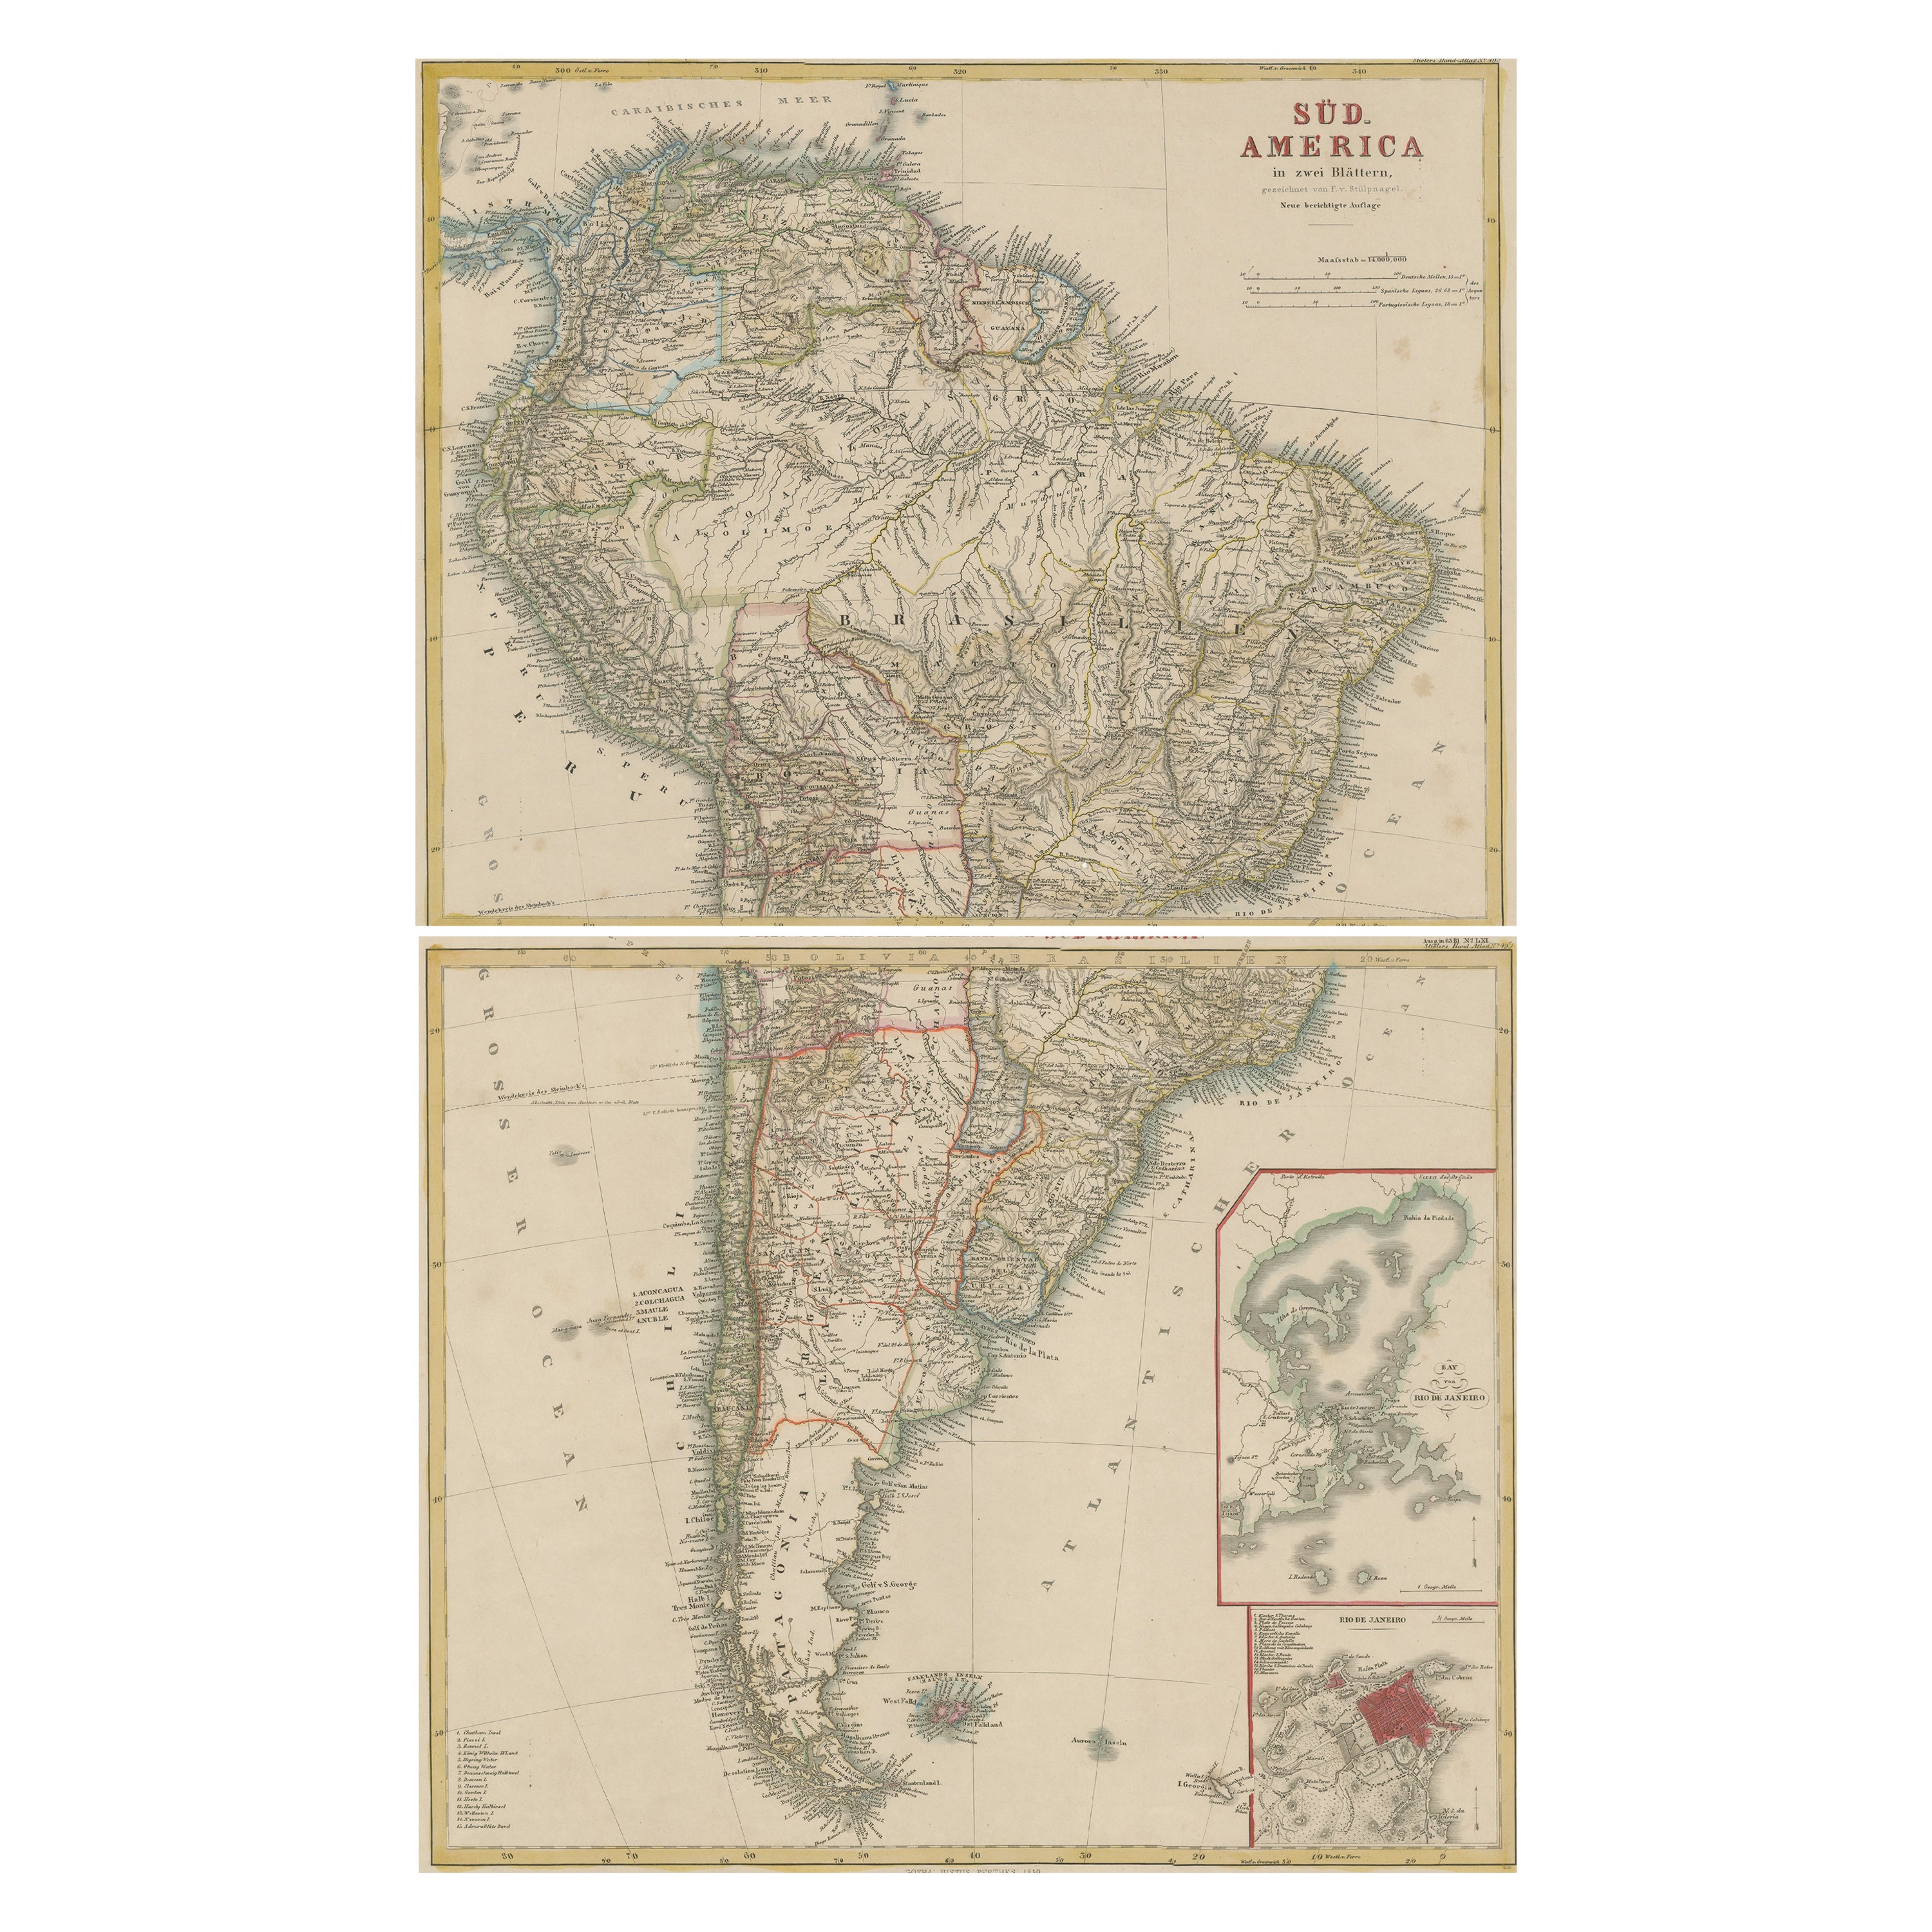 Set of Two Antique Maps of South America with Inset Maps of Rio de Janeiro